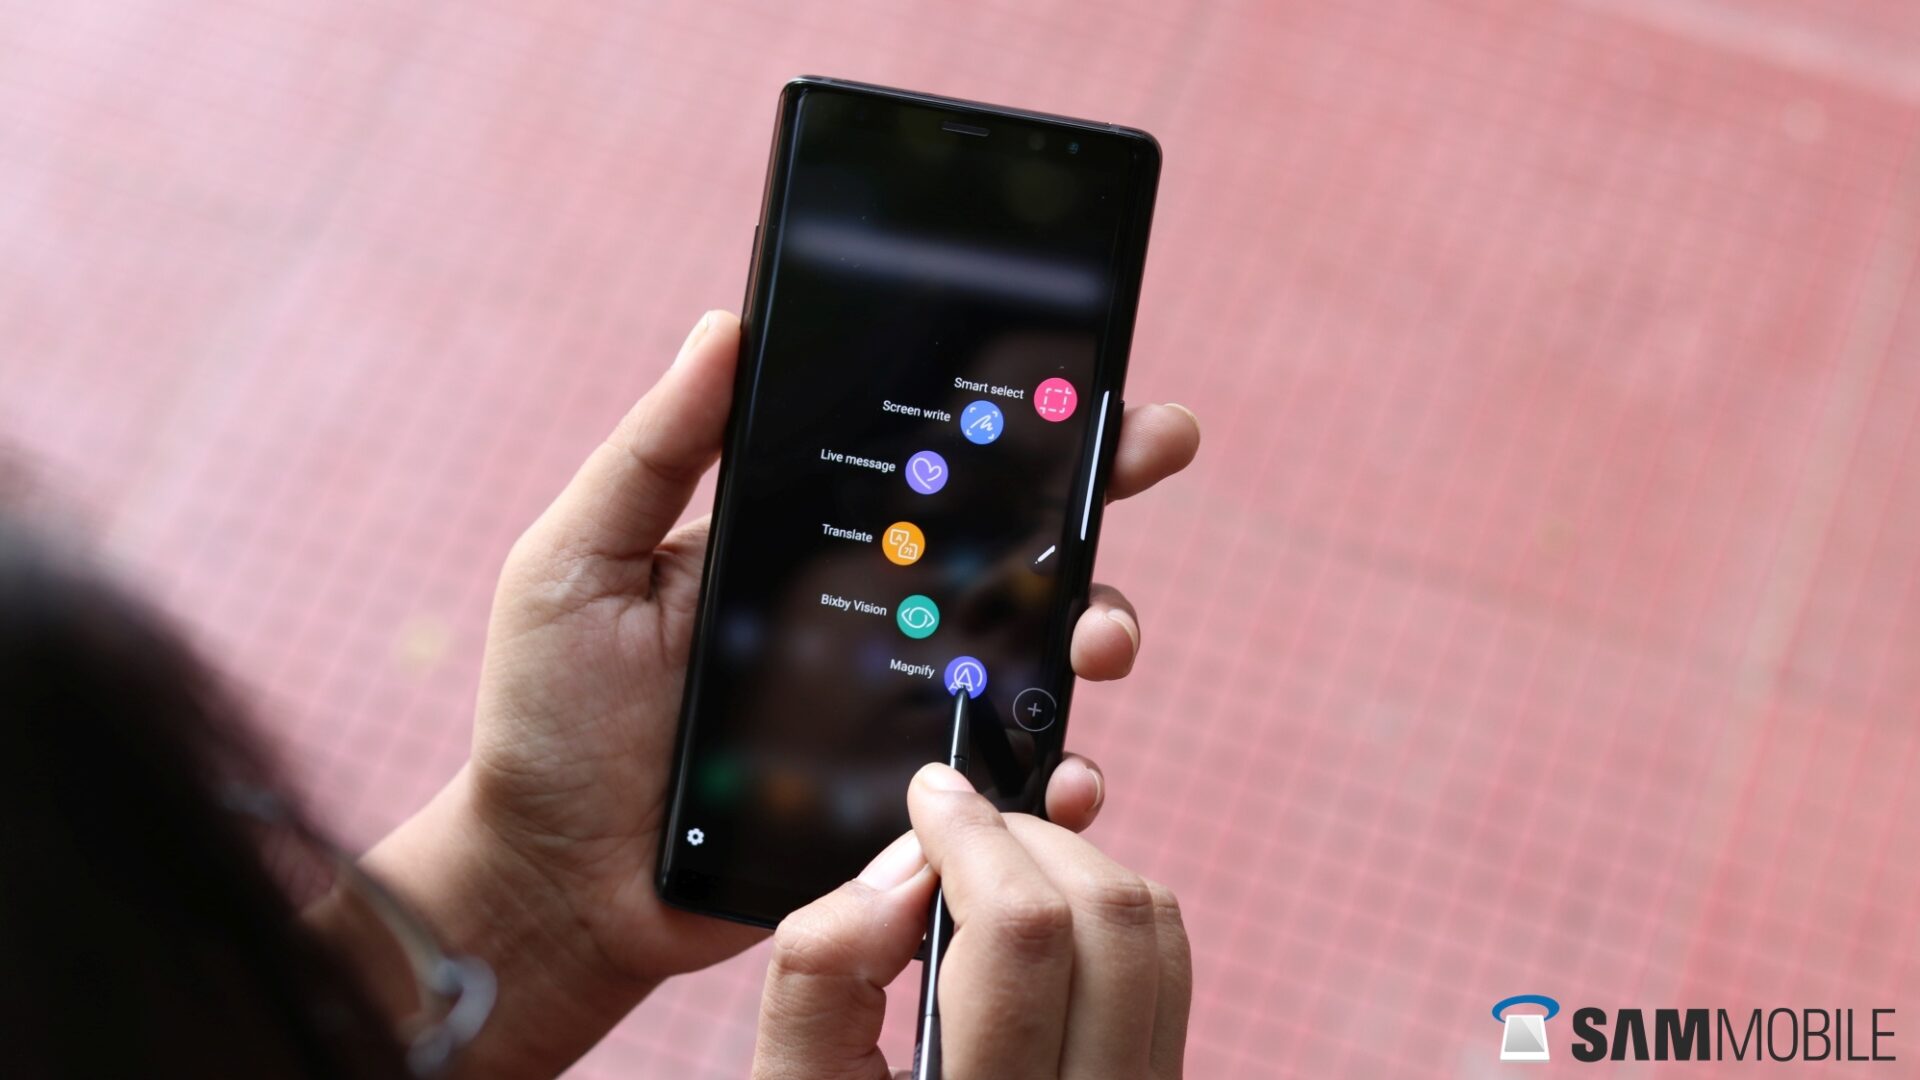 Samsung Galaxy Note 10 Plus Vs. Note 9: Specs, Price, and Features